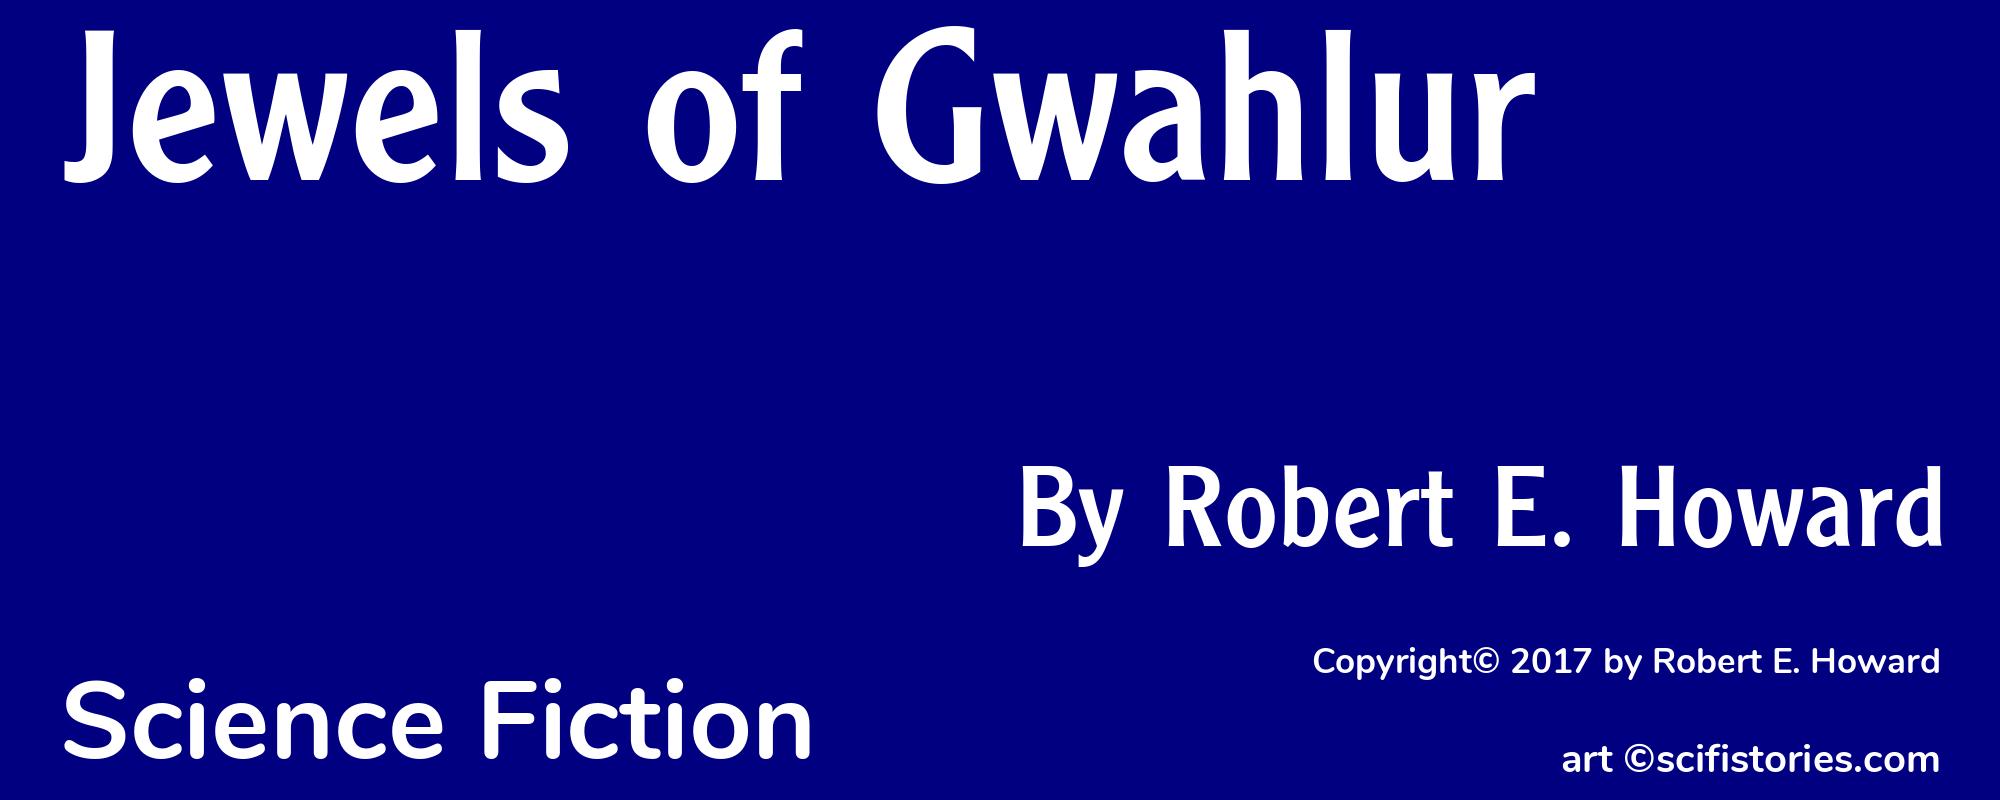 Jewels of Gwahlur - Cover